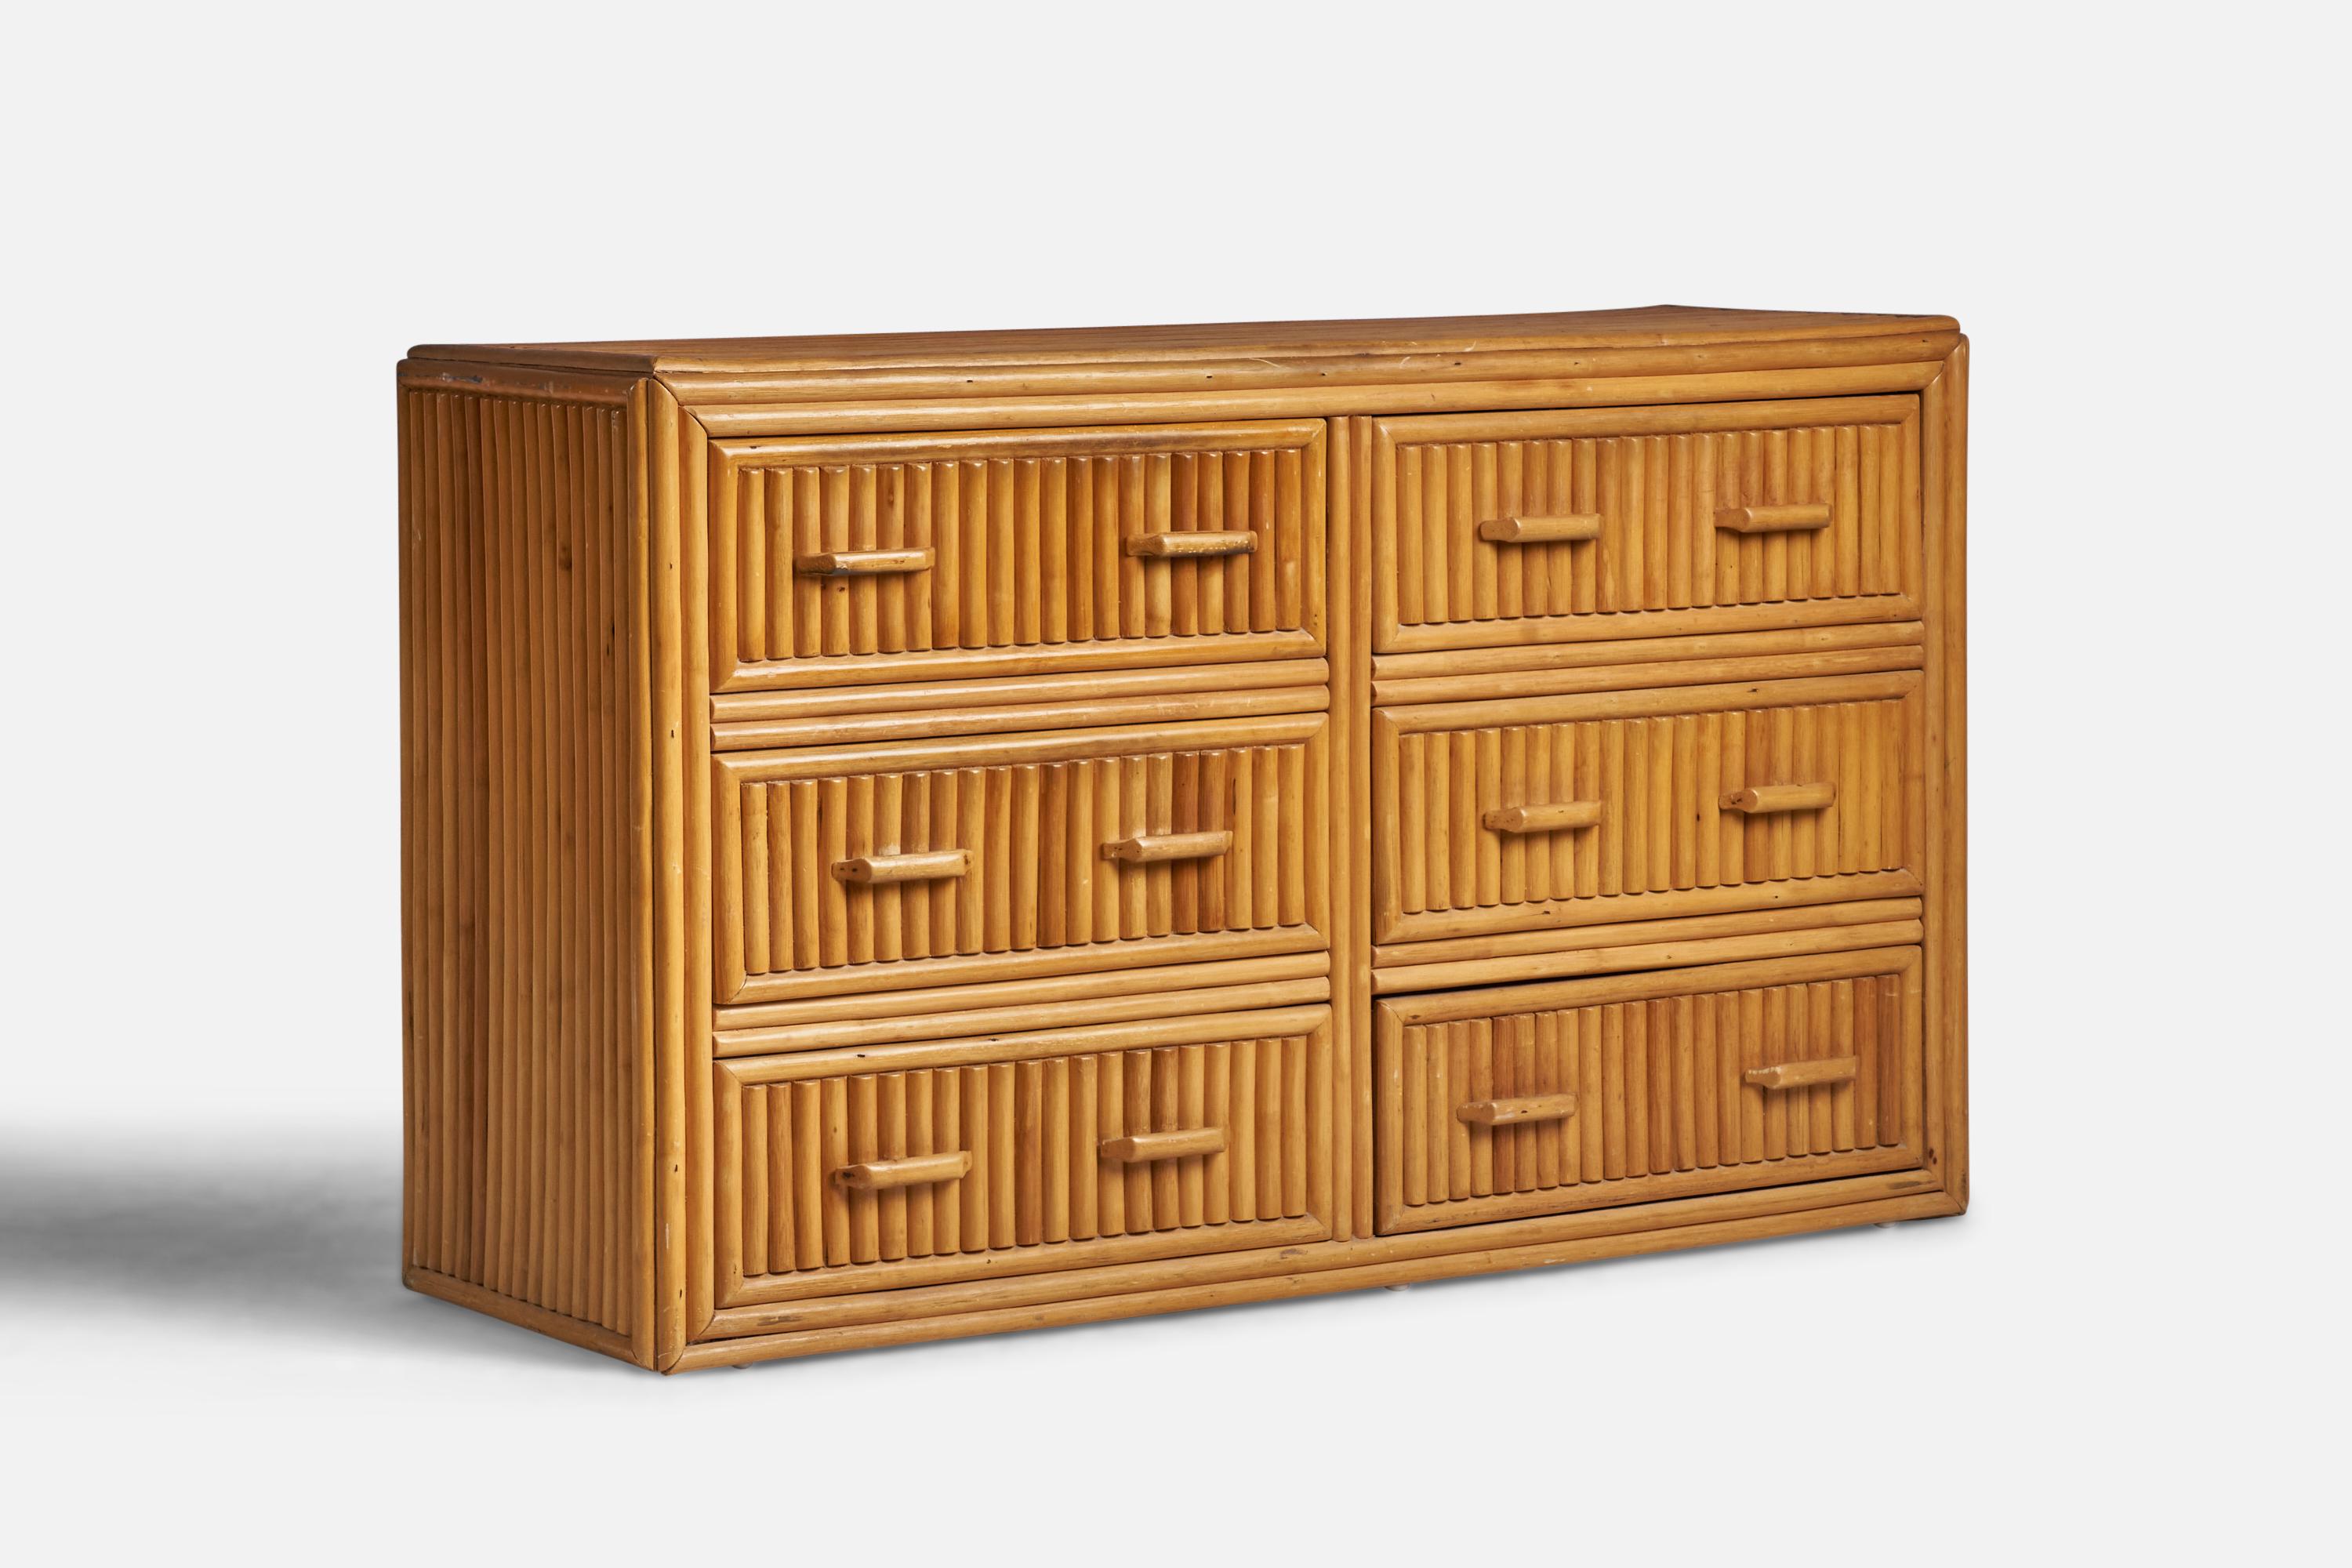 A bamboo dresser designed and produced in the US, c. 1950s.